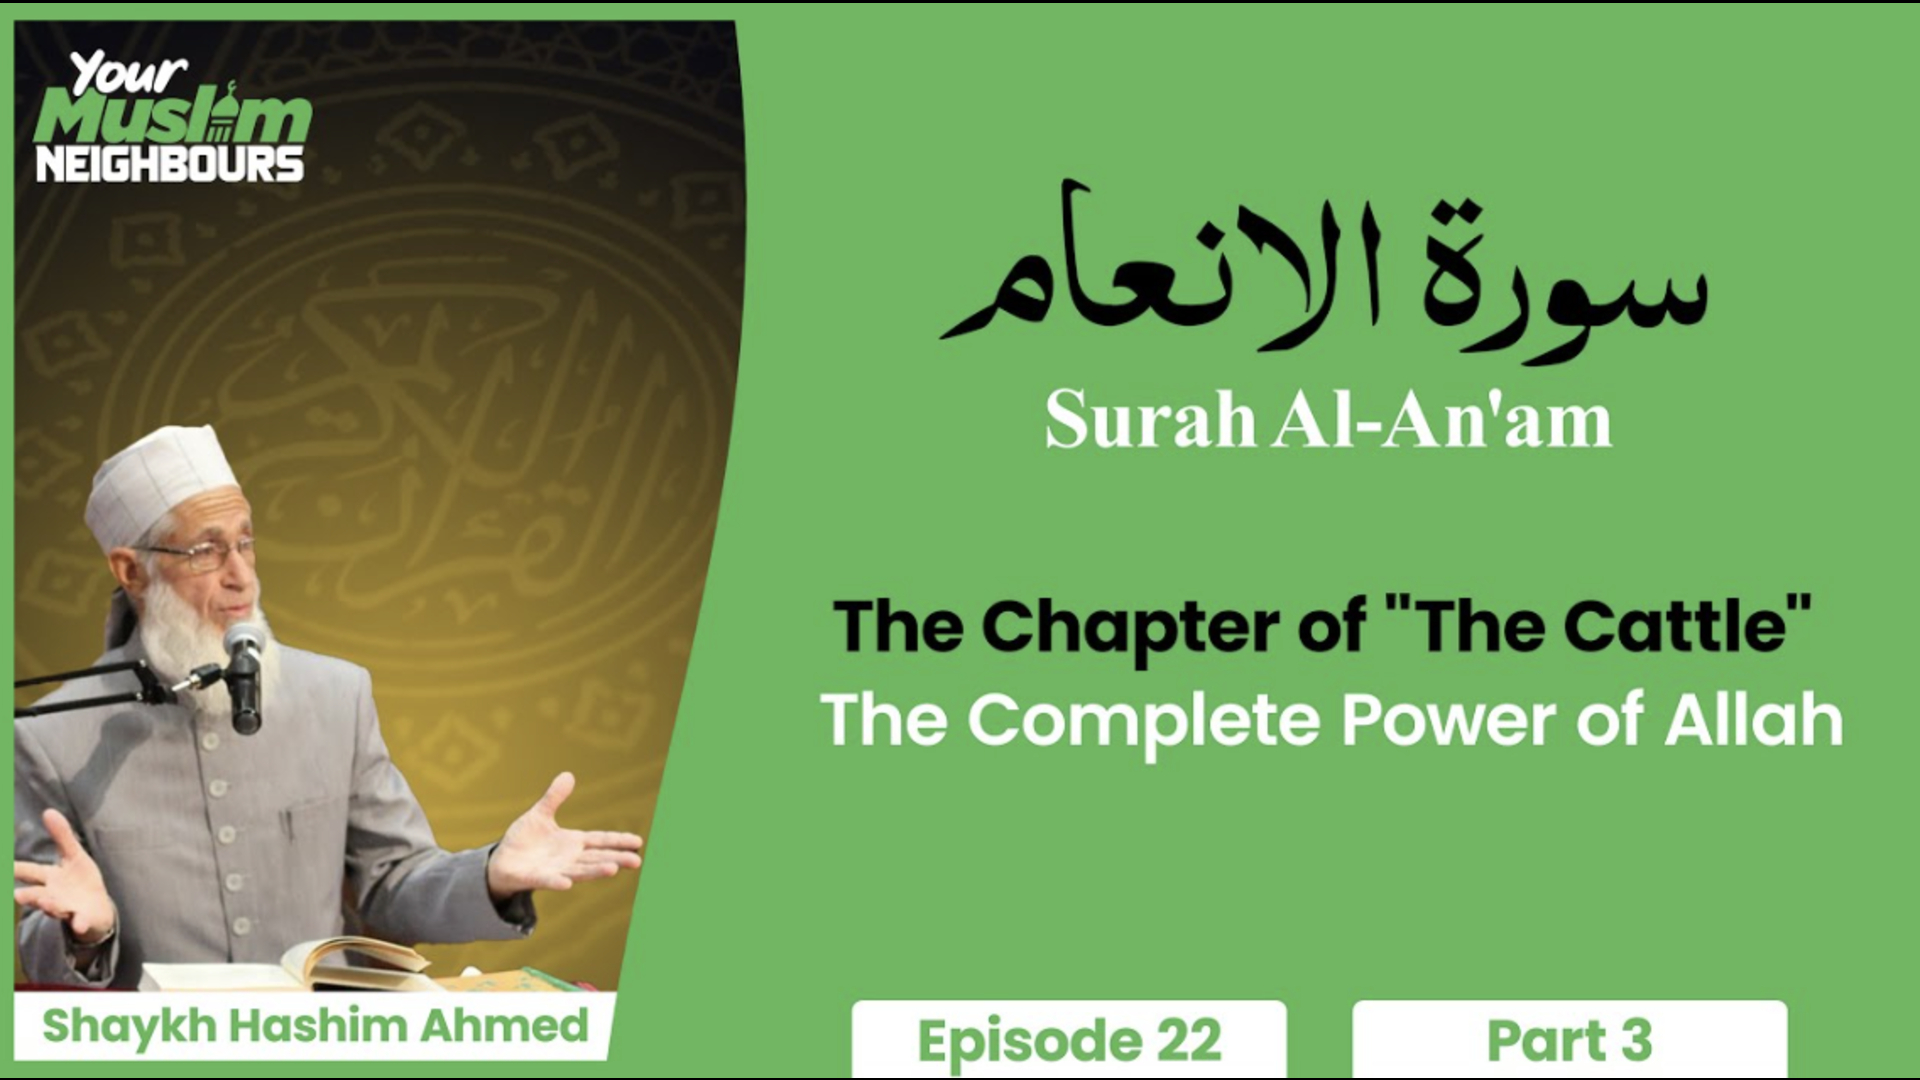 The Complete Power of Allah | Surah Al-An'am (The Chapter of "The Cattle")